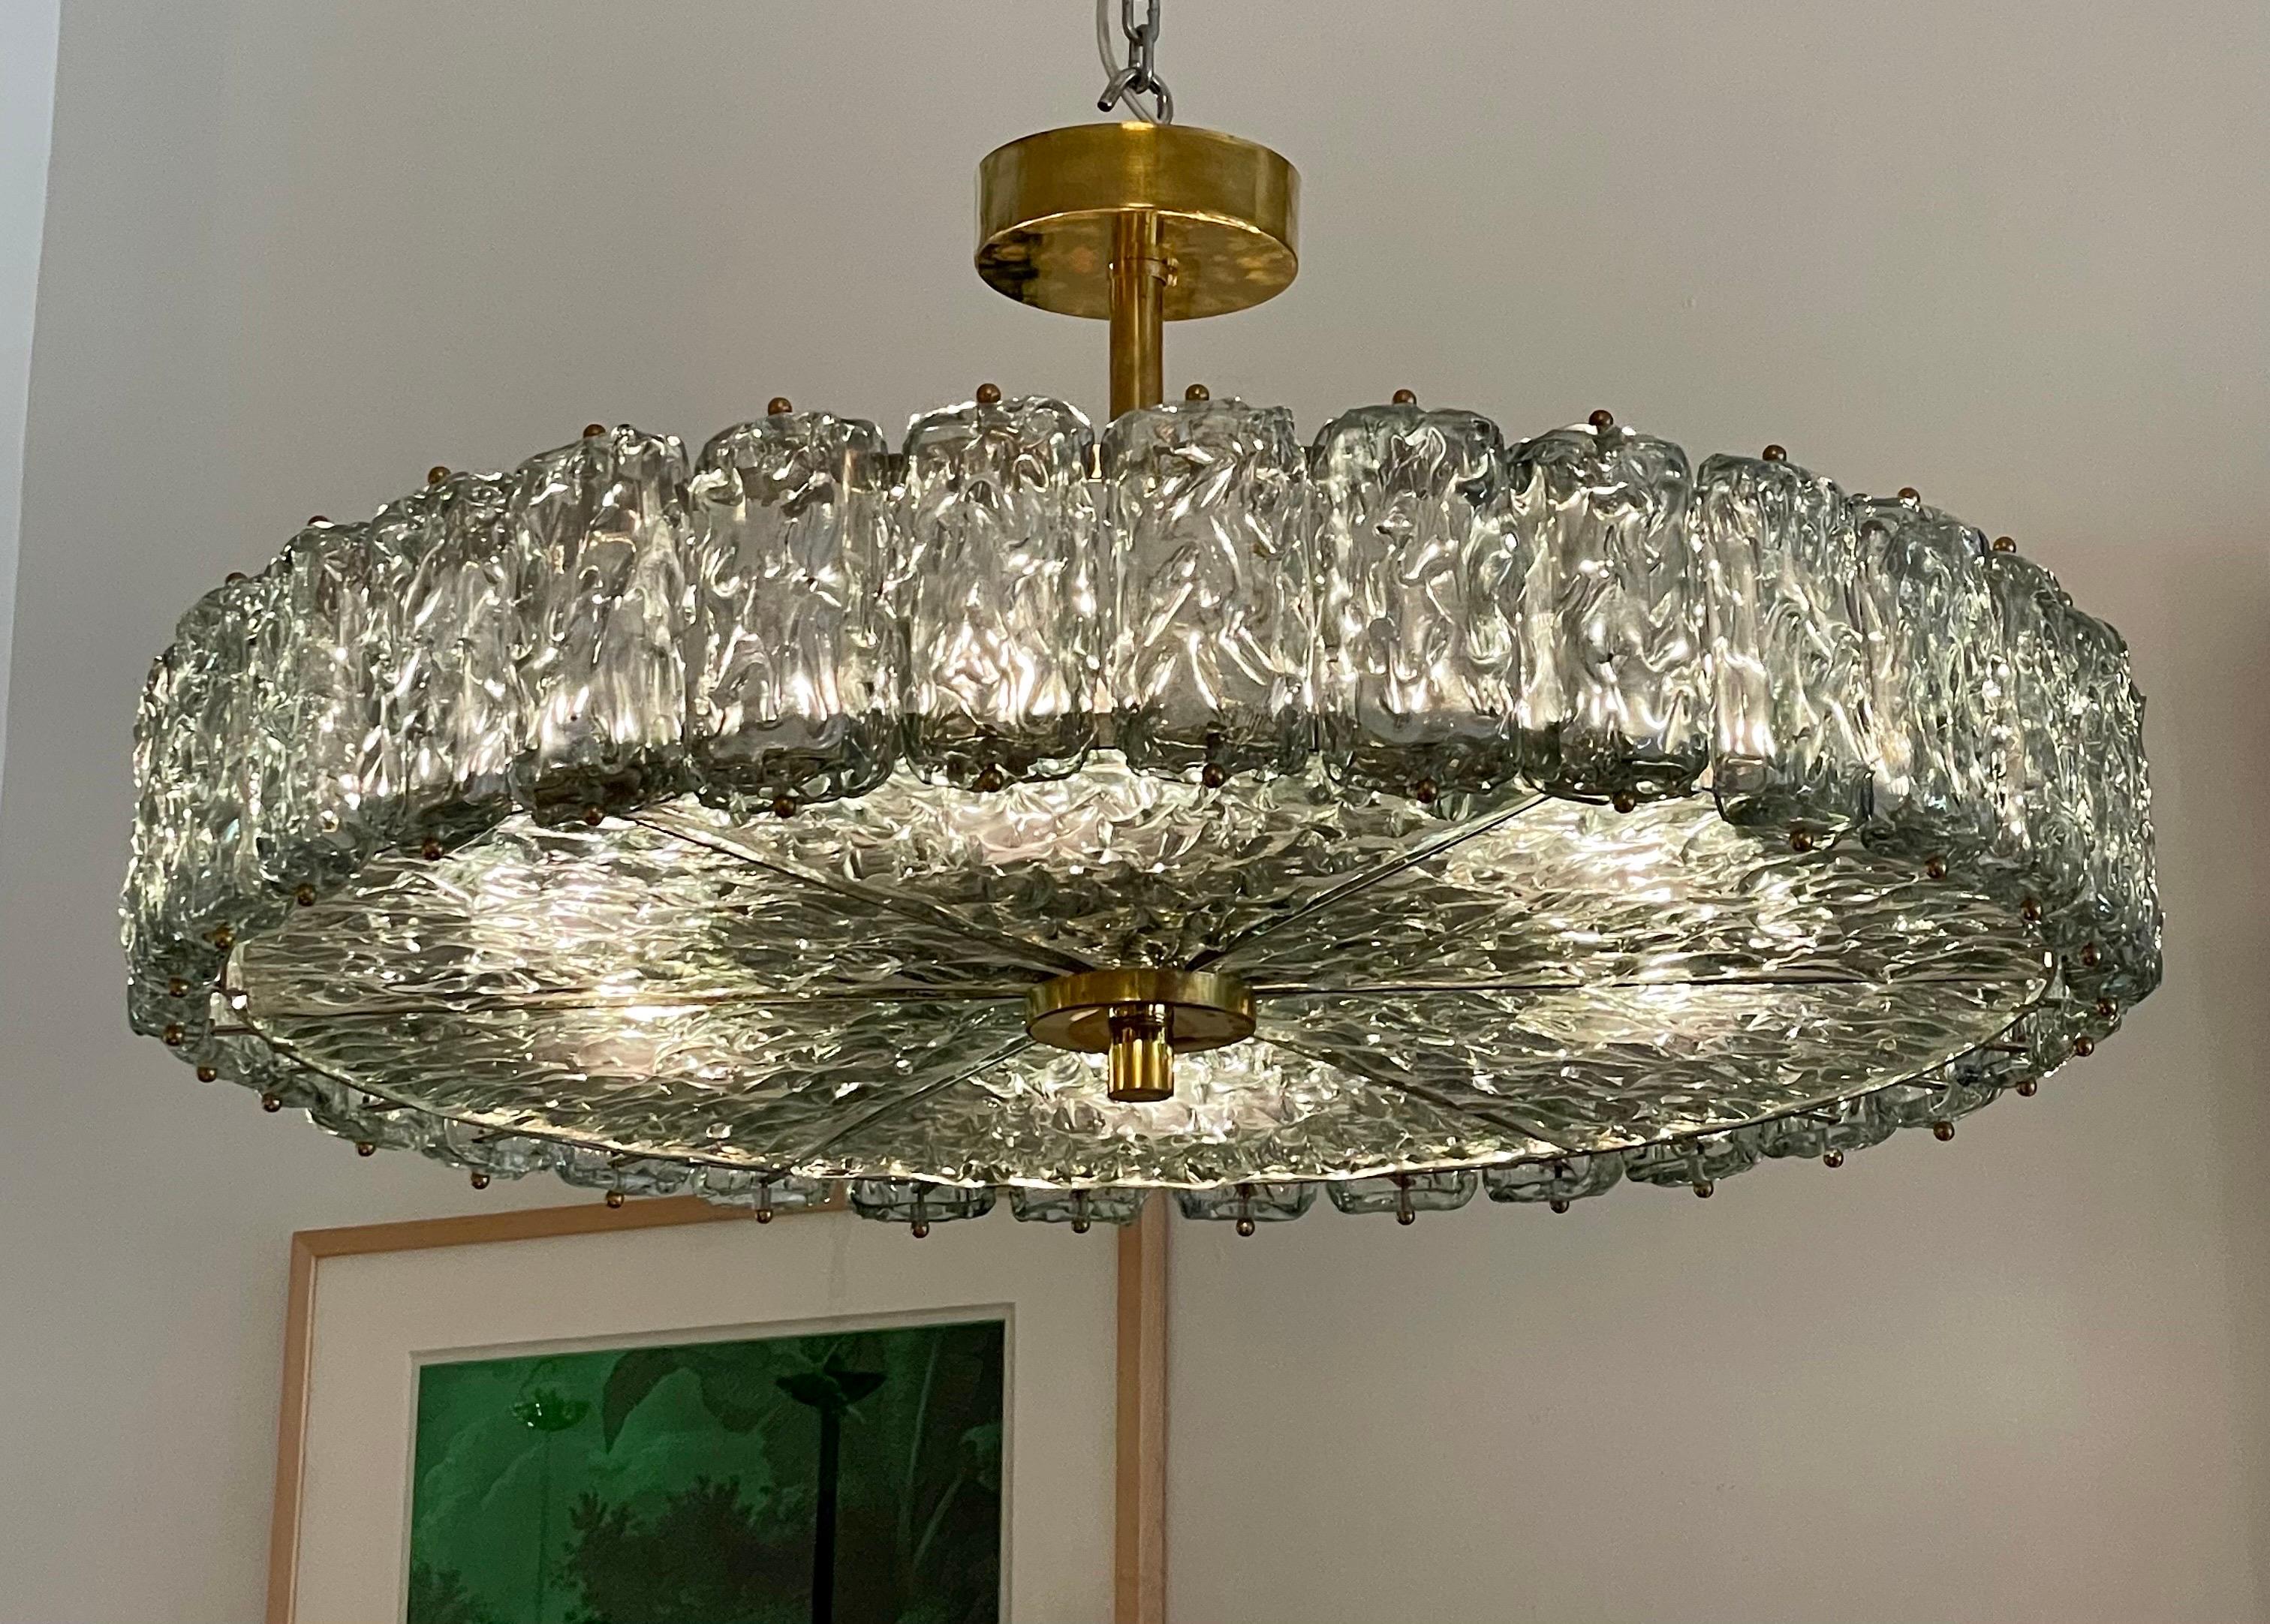 This is a semi-flush ceiling mounted chandelier covered entirely in exquisite glacier blue toned glass - style of Carl Fagerlund for Orrefors. A great scale. Brass trim to bottom and top. Six lights provide ample light - fully rewired for easy